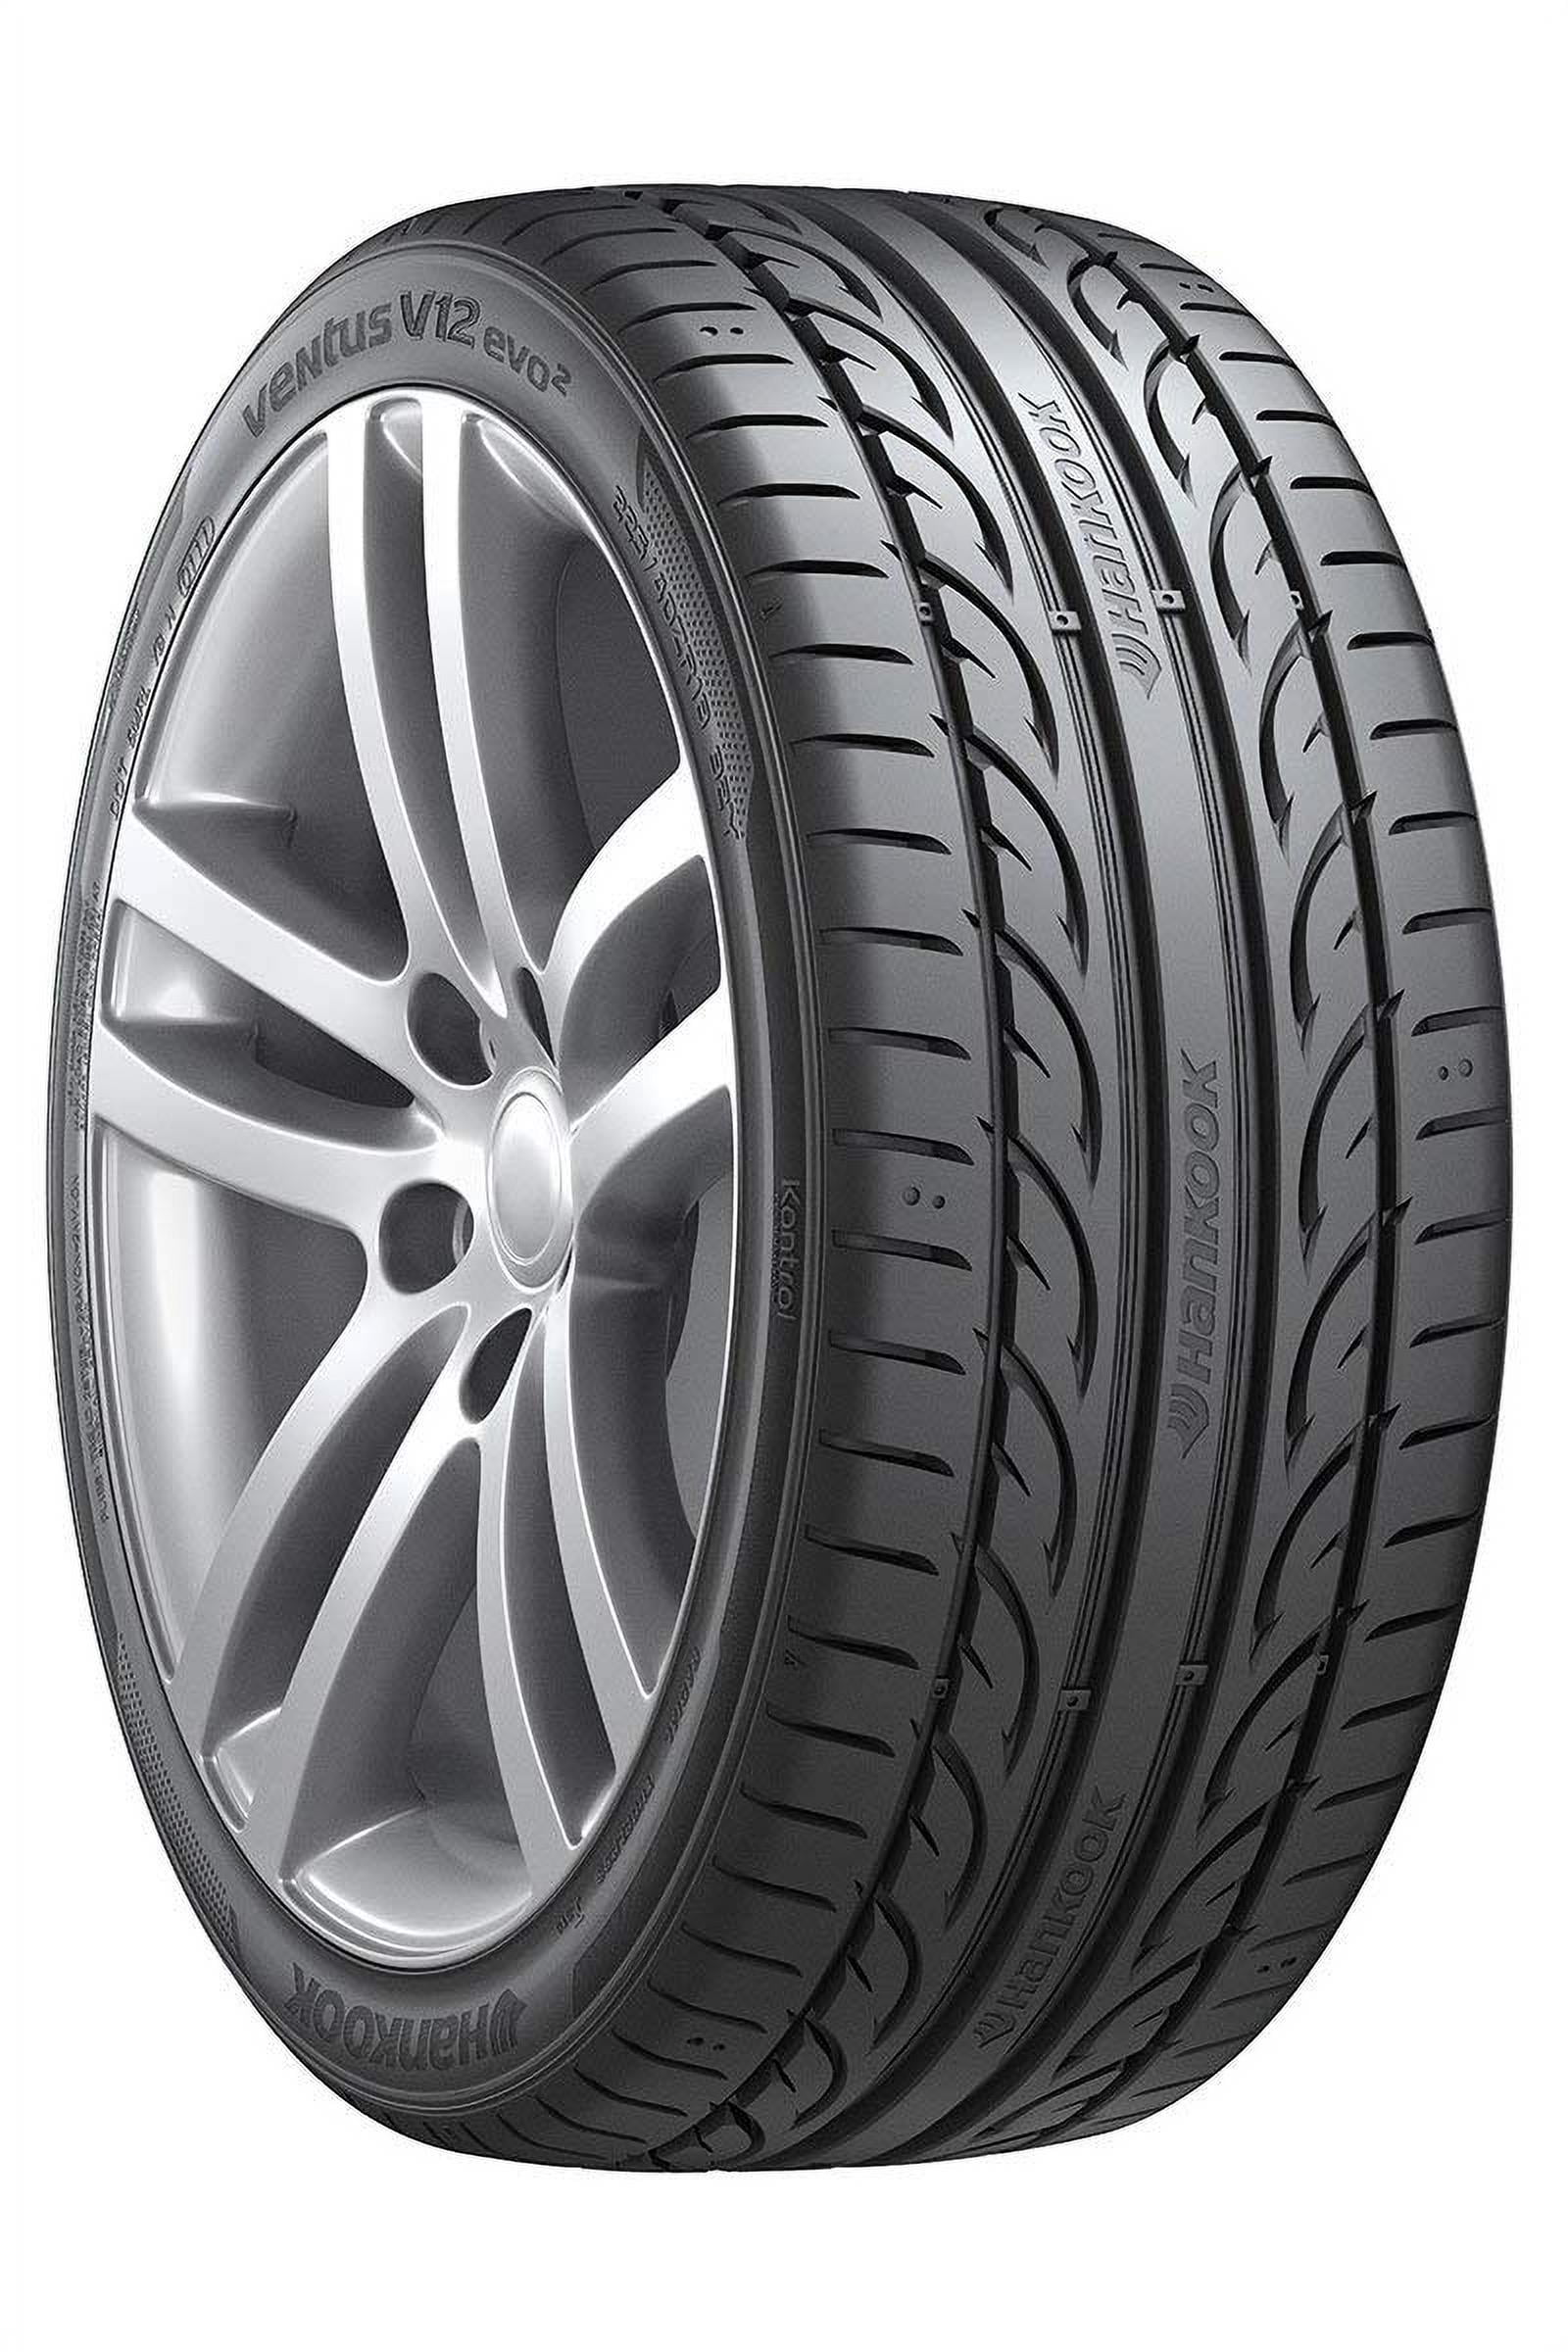 2 NEW 235/40-18 HANKOOK S1 NOBLE 2 H452 40R R18 TIRES